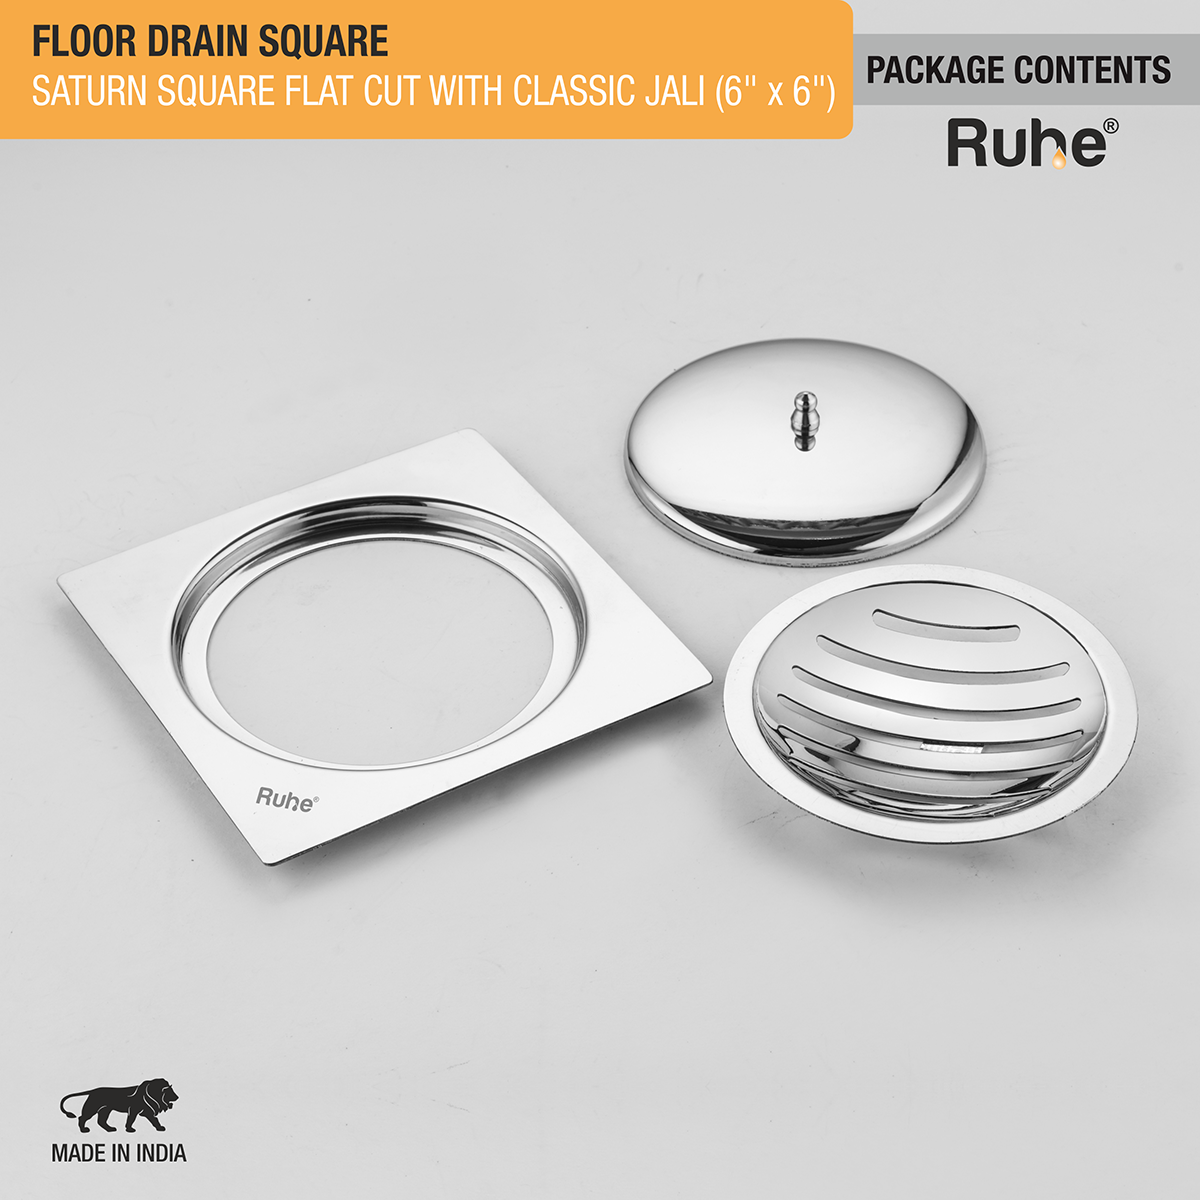 Saturn Classic Jali Square Flat Cut Floor Drain (6 x 6 Inches) with Lid package content